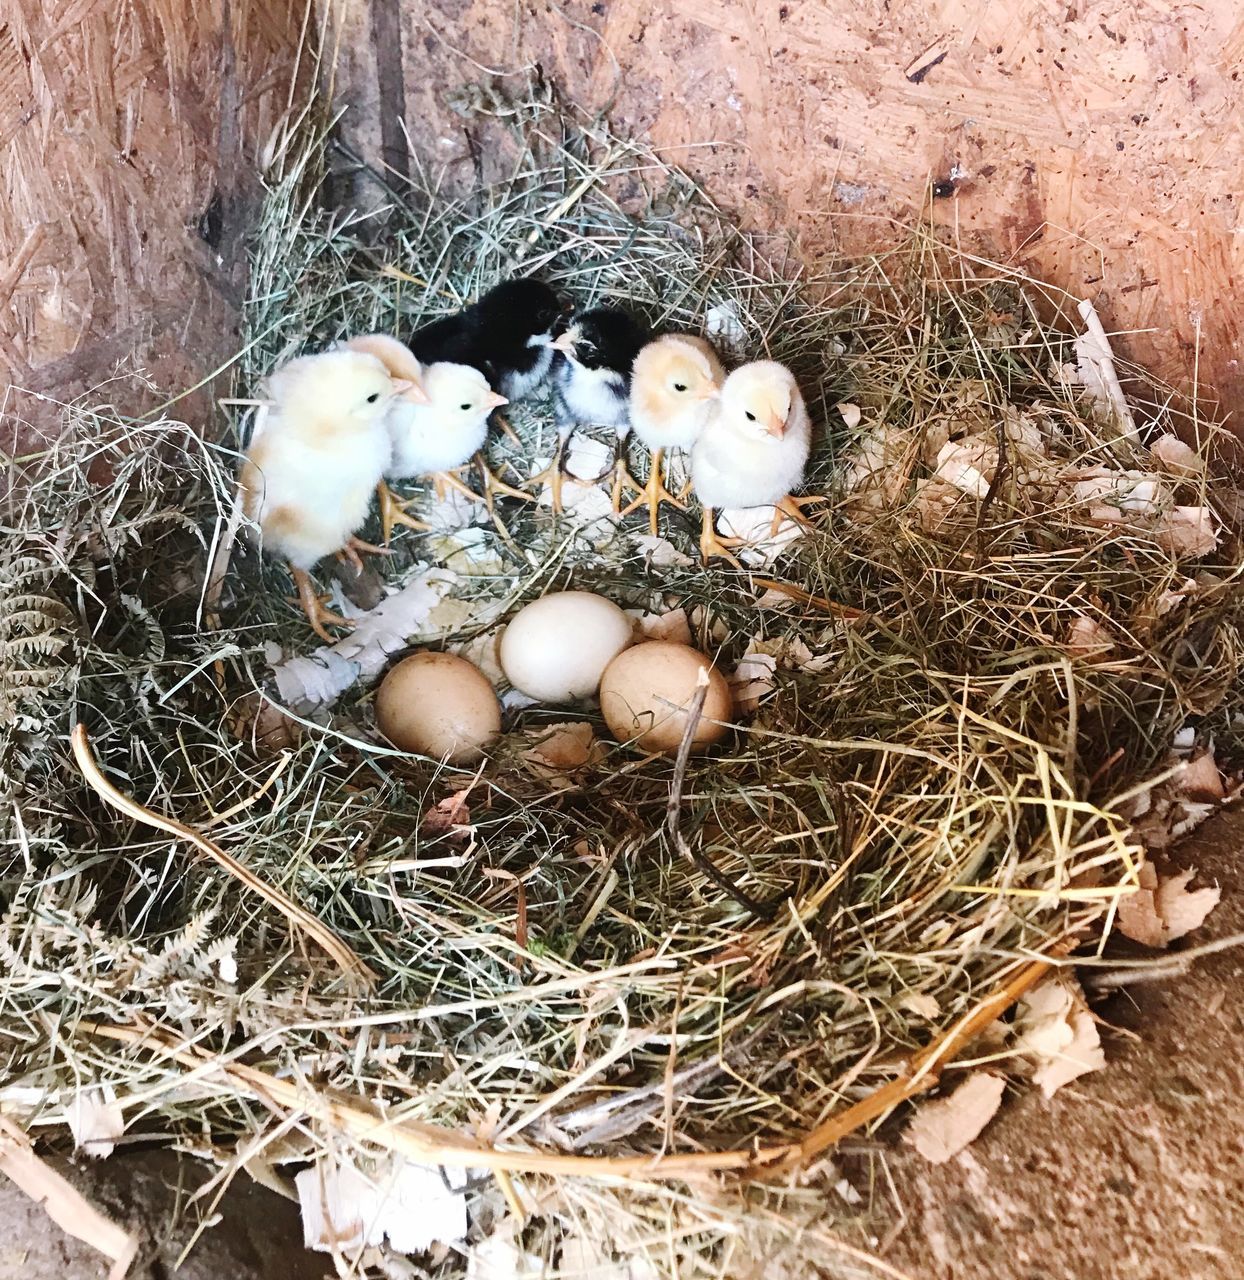 animal nest, bird, egg, animal themes, young bird, animal, bird nest, young animal, new life, beginnings, group of animals, vertebrate, high angle view, no people, nature, baby chicken, animal egg, day, hay, chick, outdoors, animal family